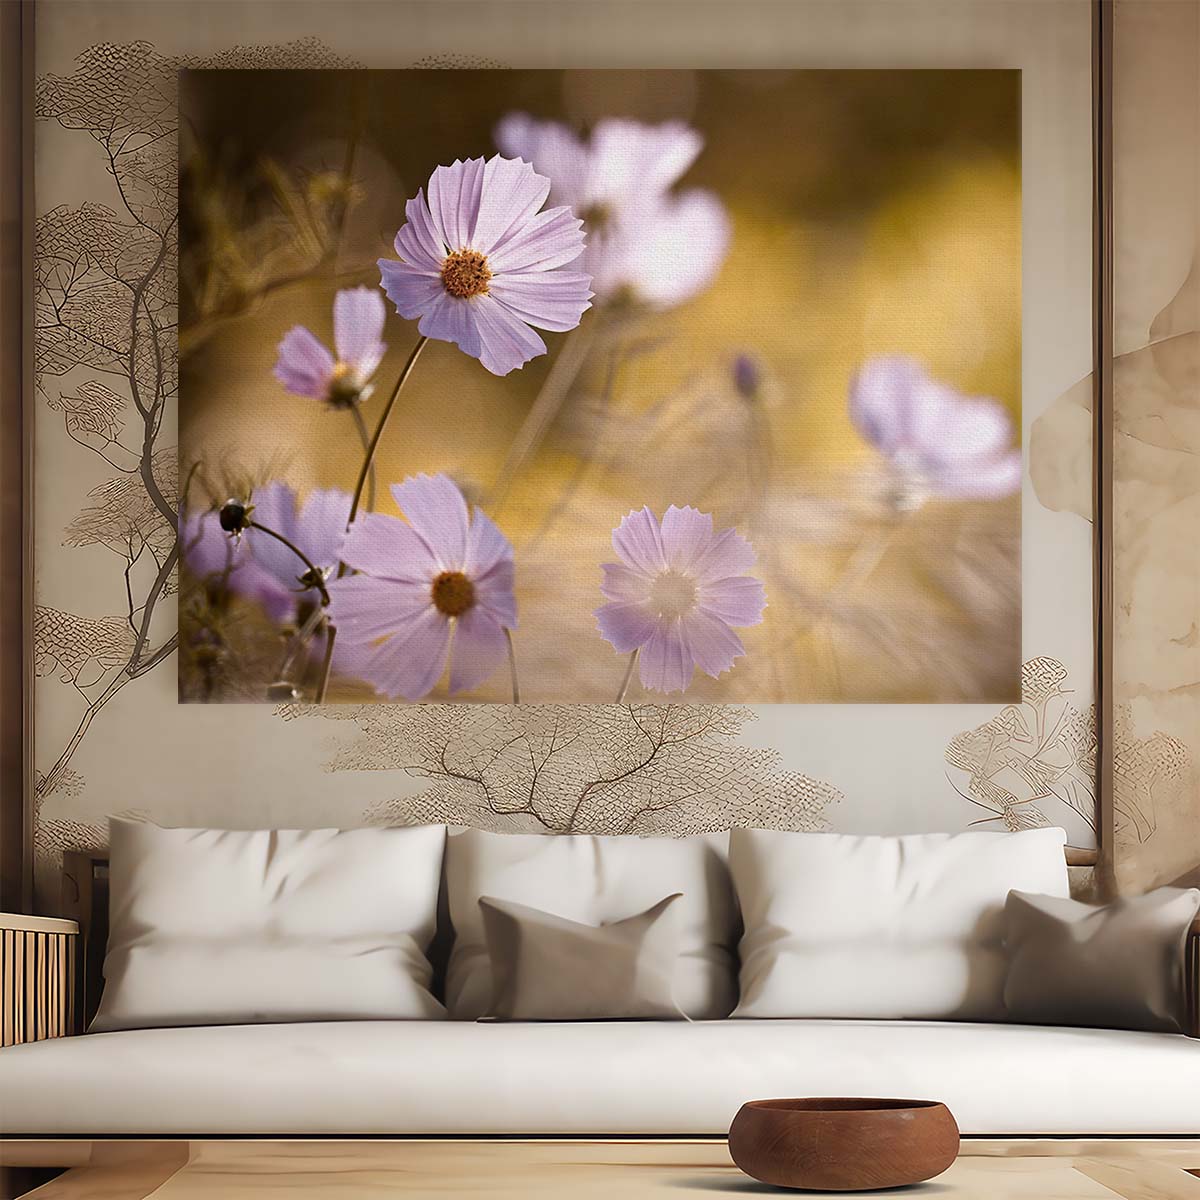 Delicate Pink Cosmos Floral Macro Garden Wall Art by Luxuriance Designs. Made in USA.